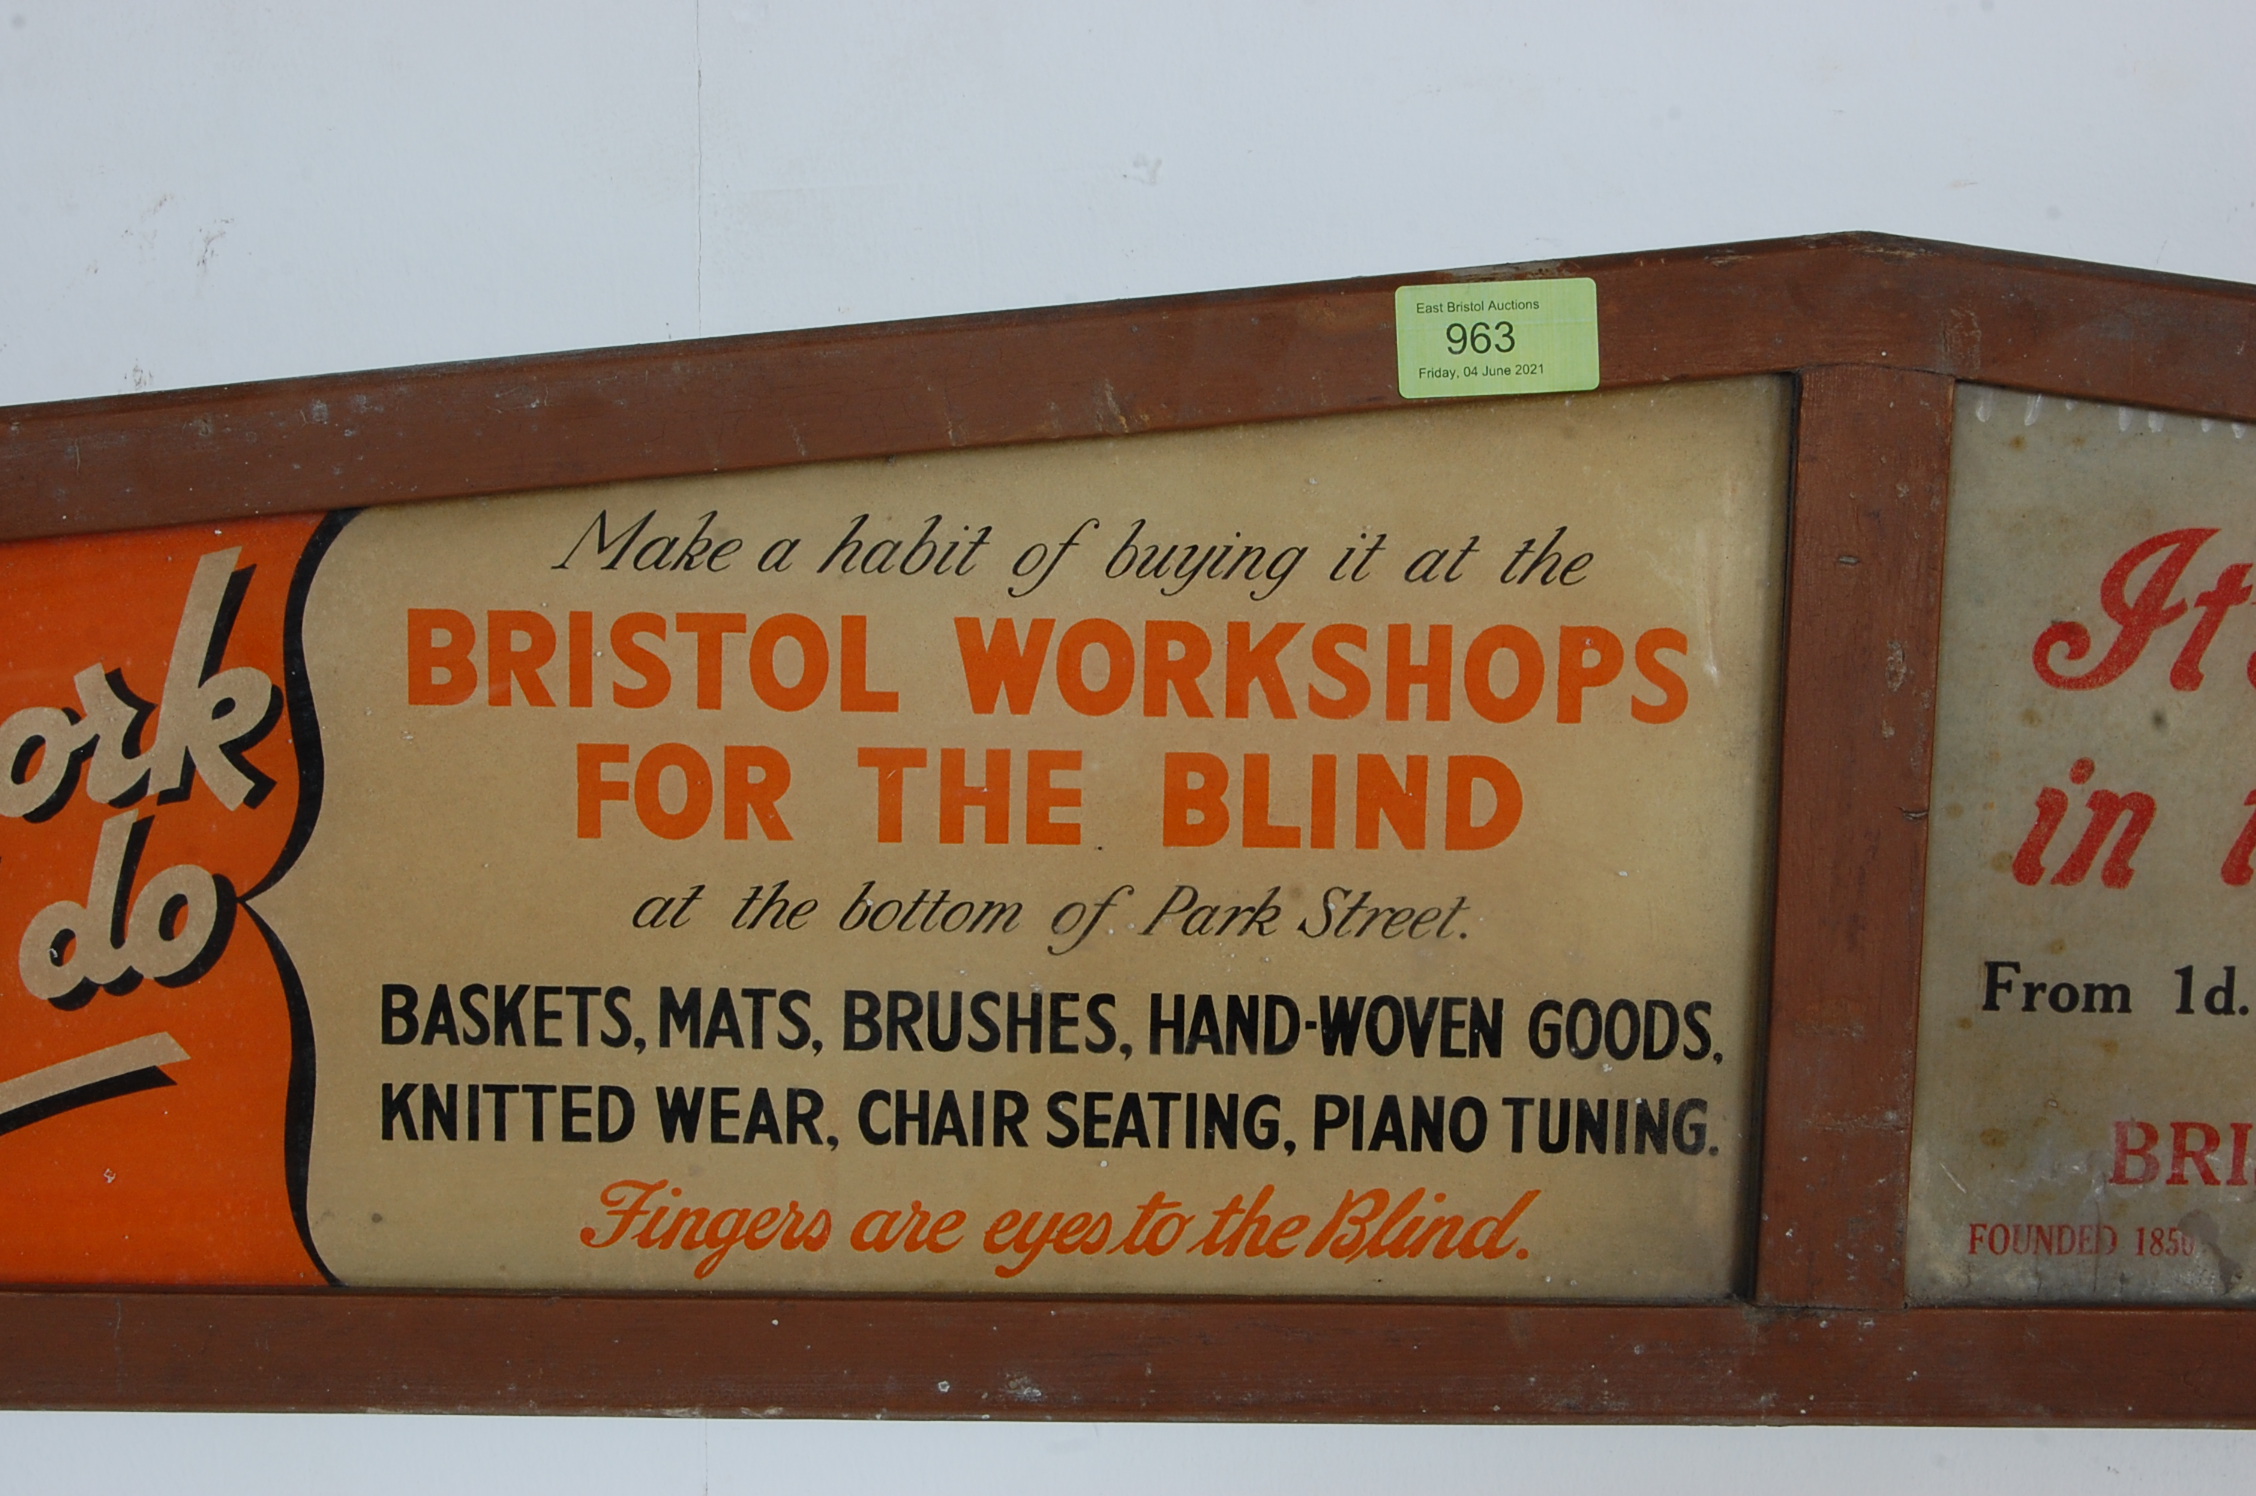 VINTAGE RETRO 20TH CENTURY GLASS ADVERTISING SIGN FOR BRISTOL WORKSHOP FOR THE BLIND - Image 3 of 7